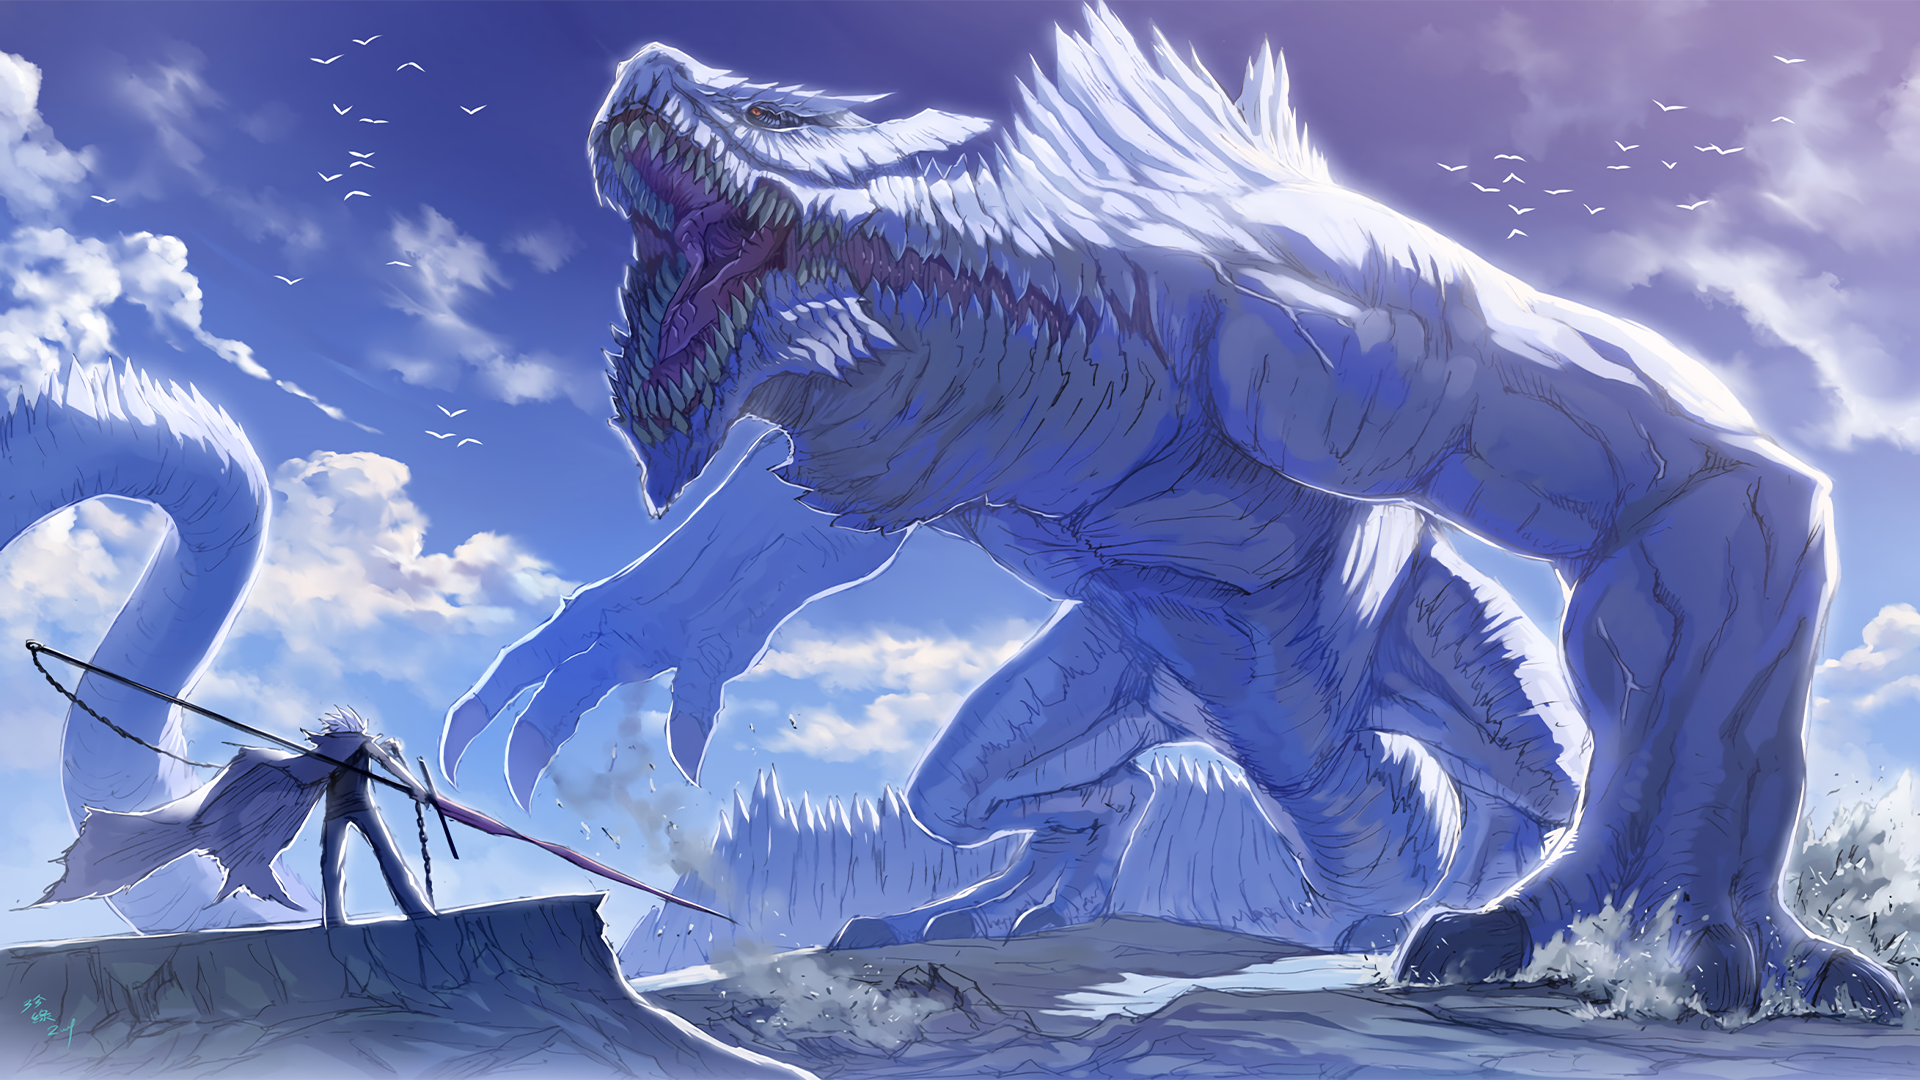 Anime Wallpaper Pretty Cool Monster Fight Image Indie Db